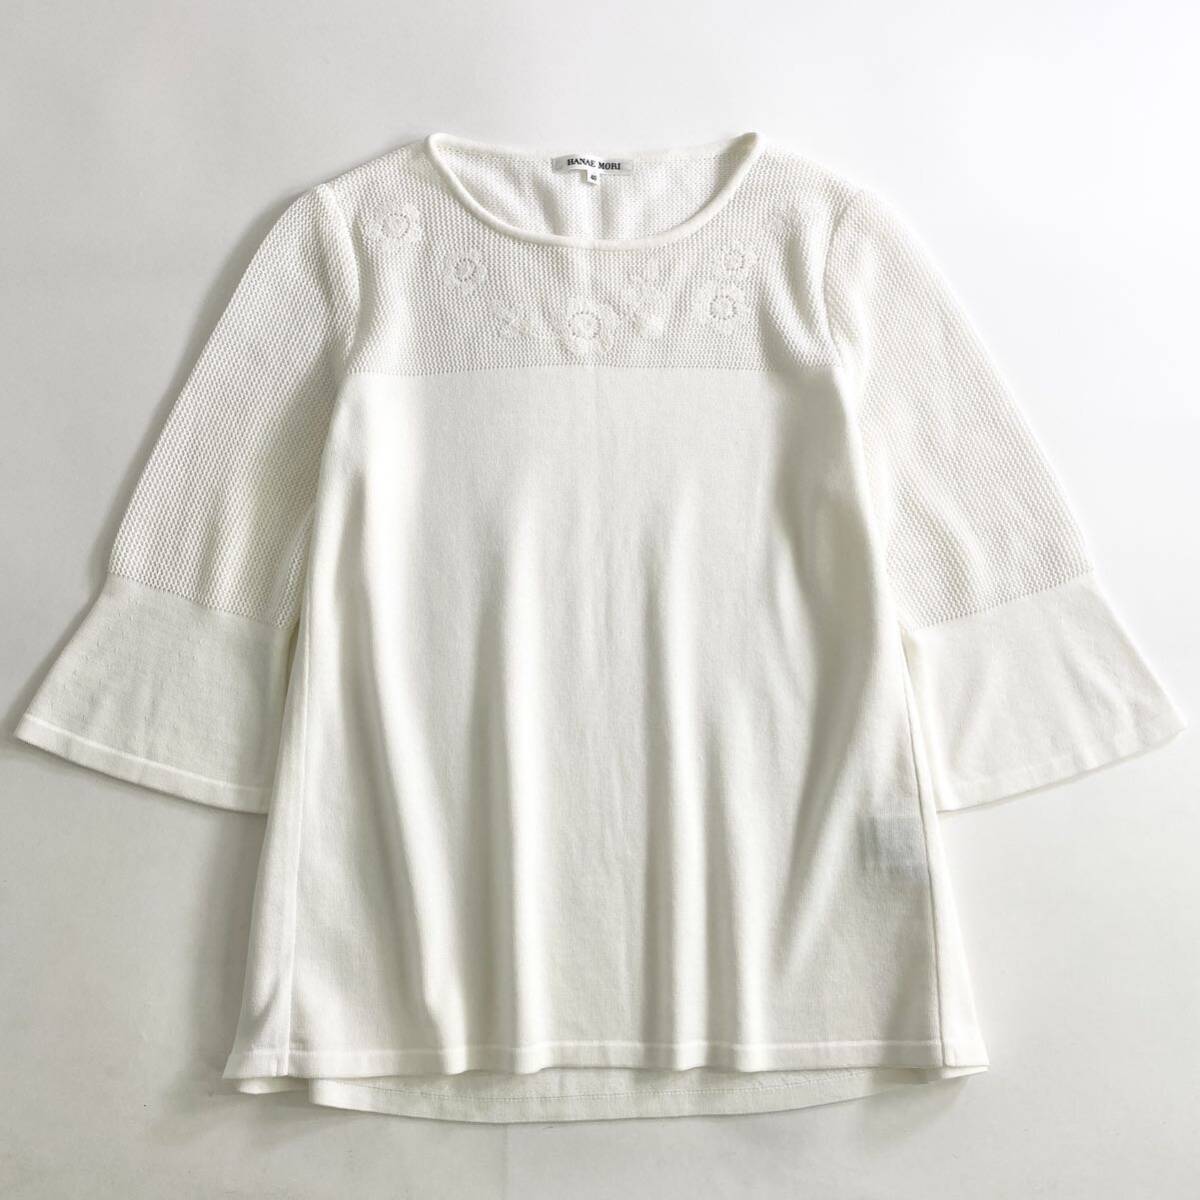 Le9{ beautiful goods }HANAE MORI is na emo li knitted sweater 7 minute sleeve knitted floral print embroidery 40/L corresponding width of a garment easy * lady's for women 